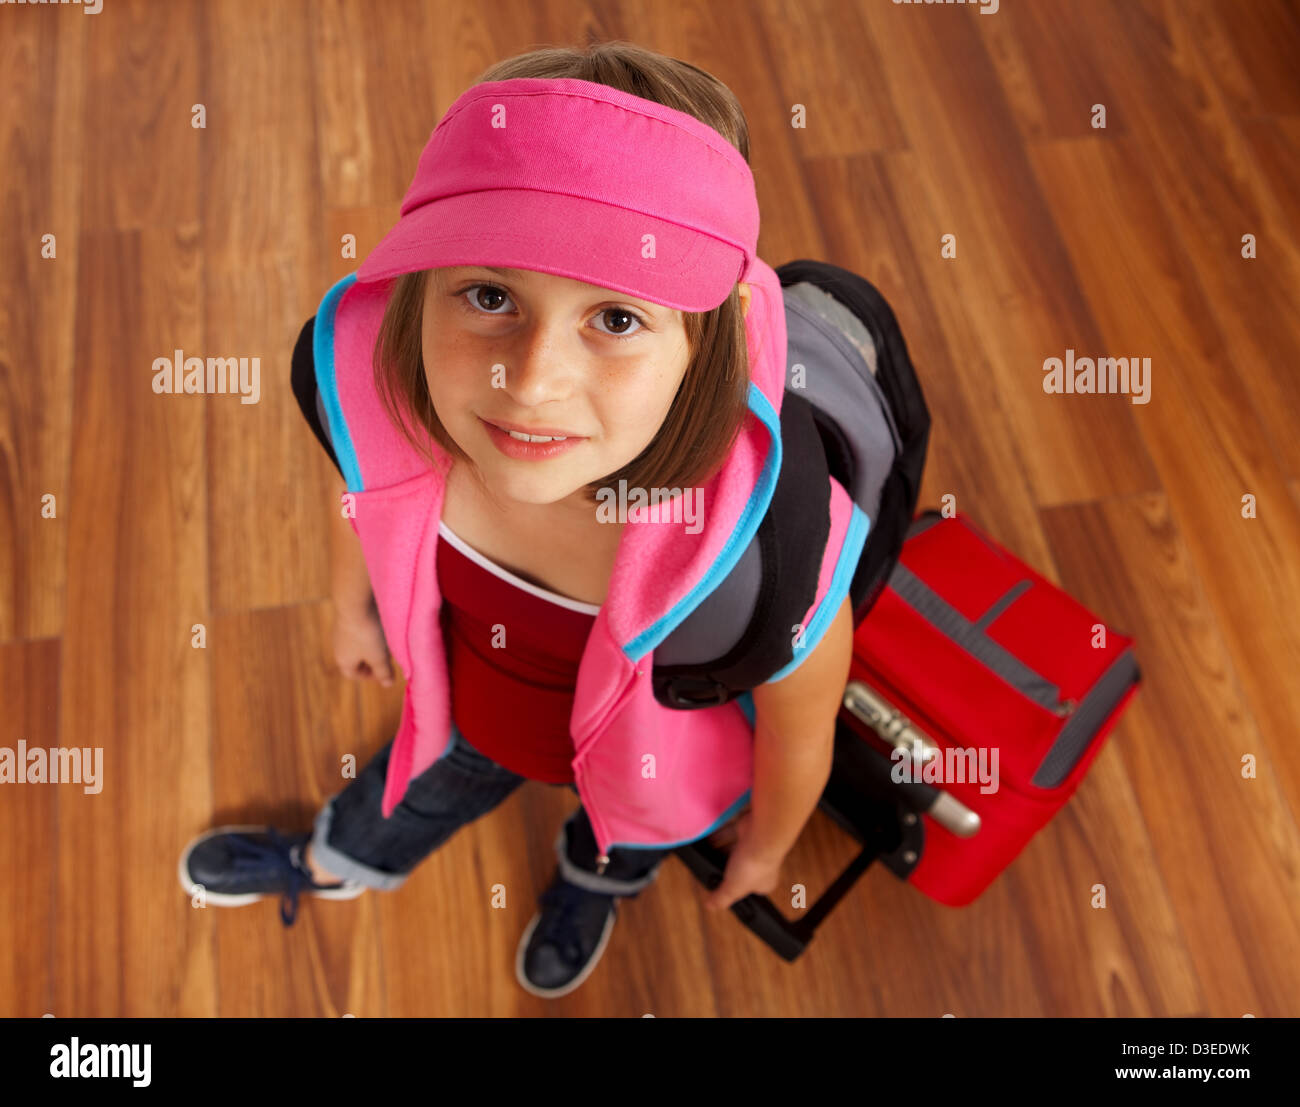 Little girl ready to travel, carrying red luggage Stock Photo